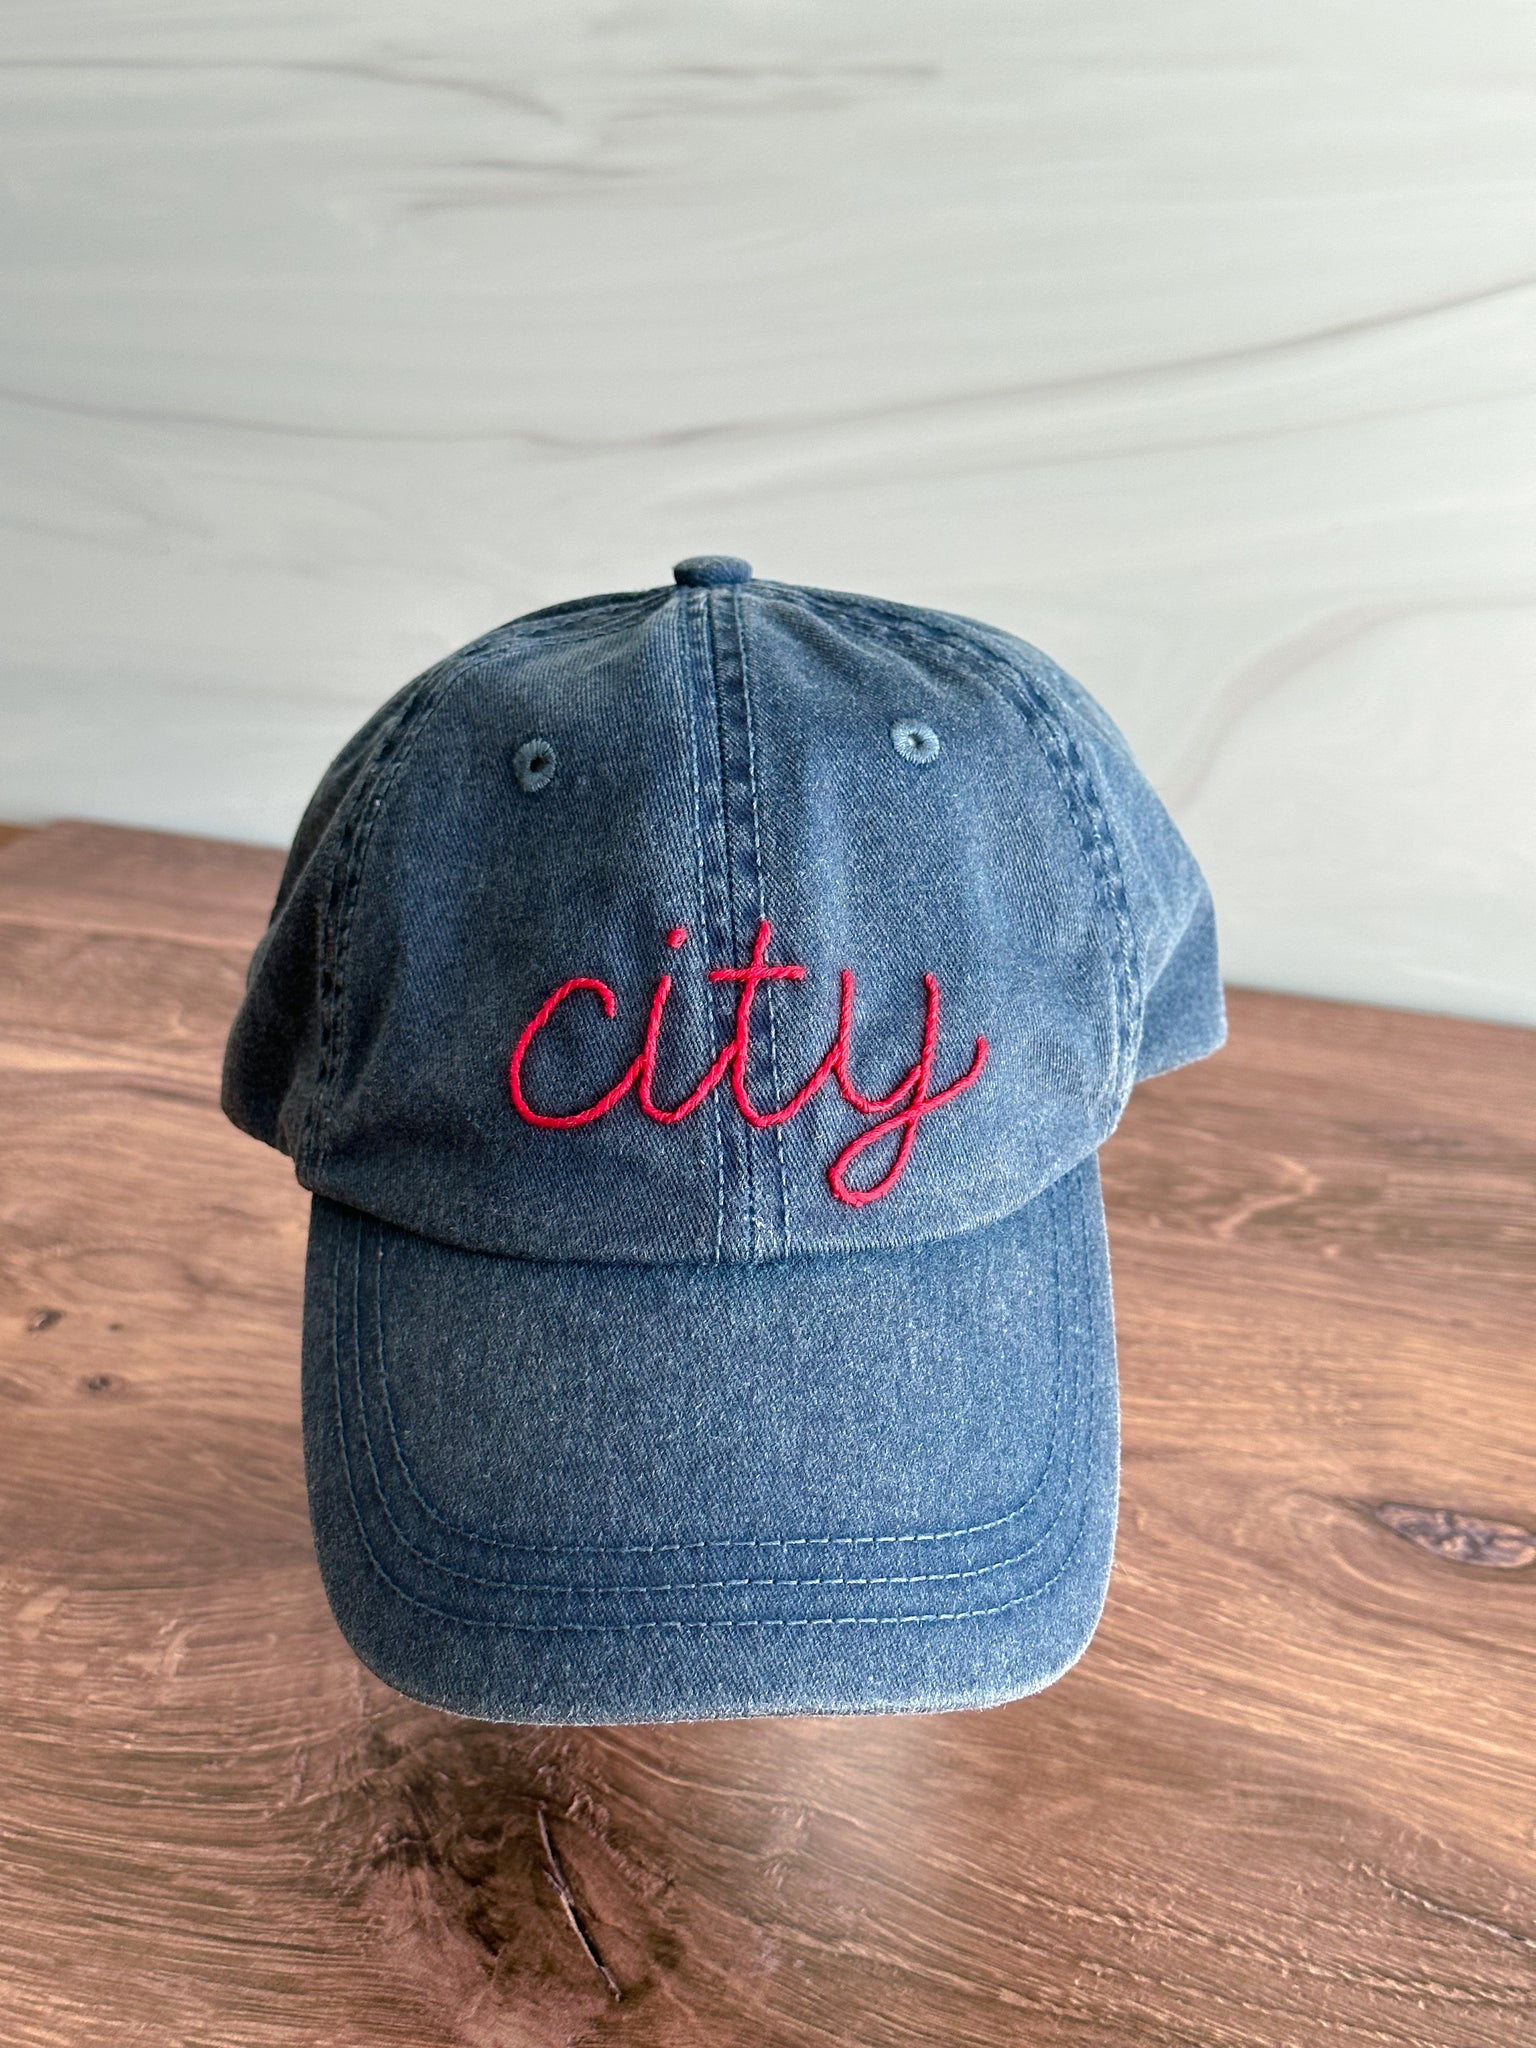 STL City Hand Embroidered Hat